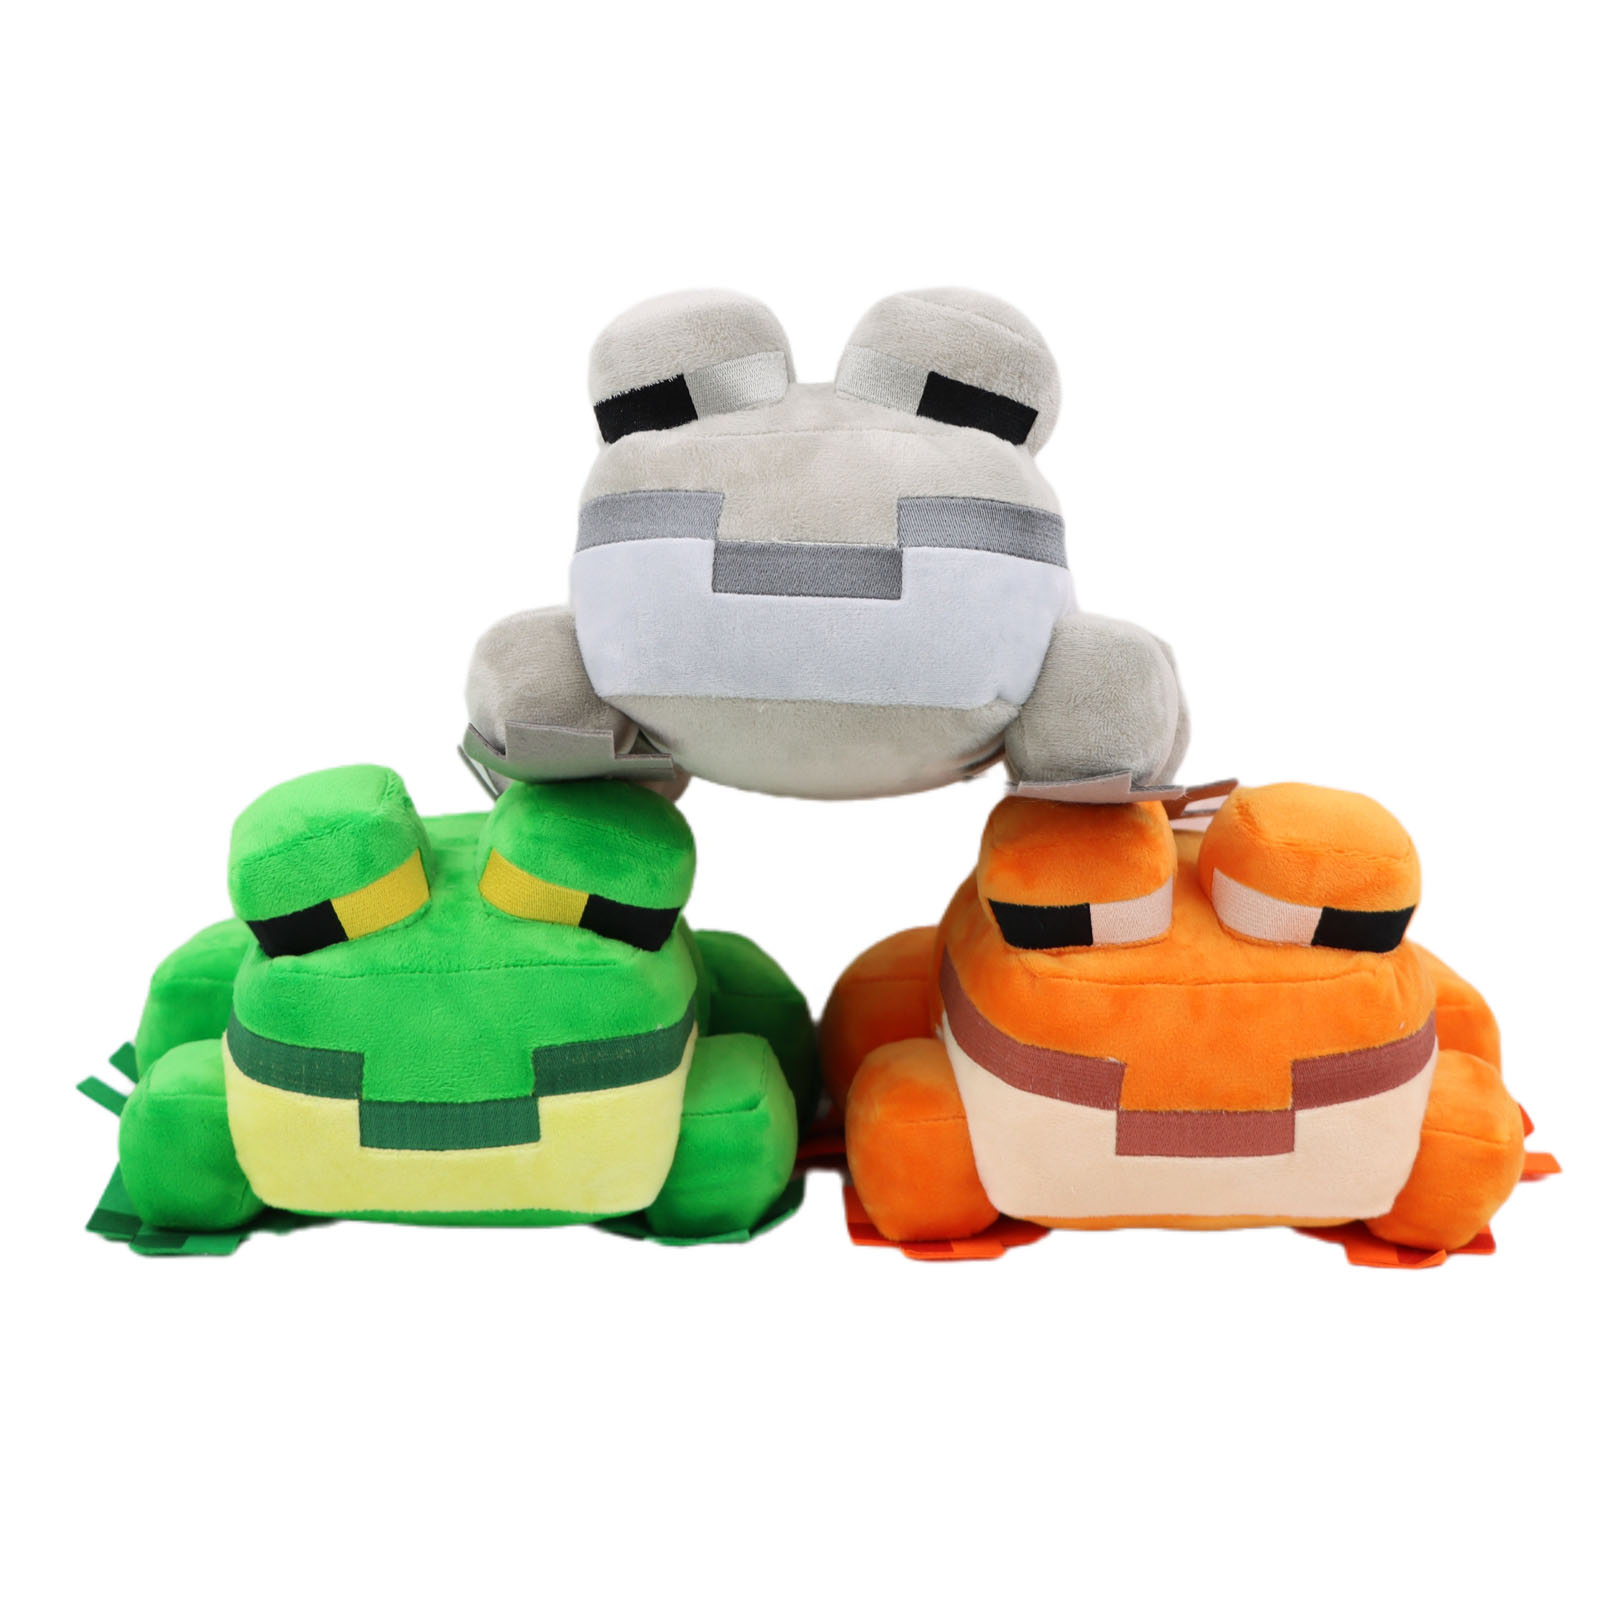 Adorable 27cm 10 6in Frog Plush Toy Perfect Birthday Gift For Kids, High-quality & Affordable